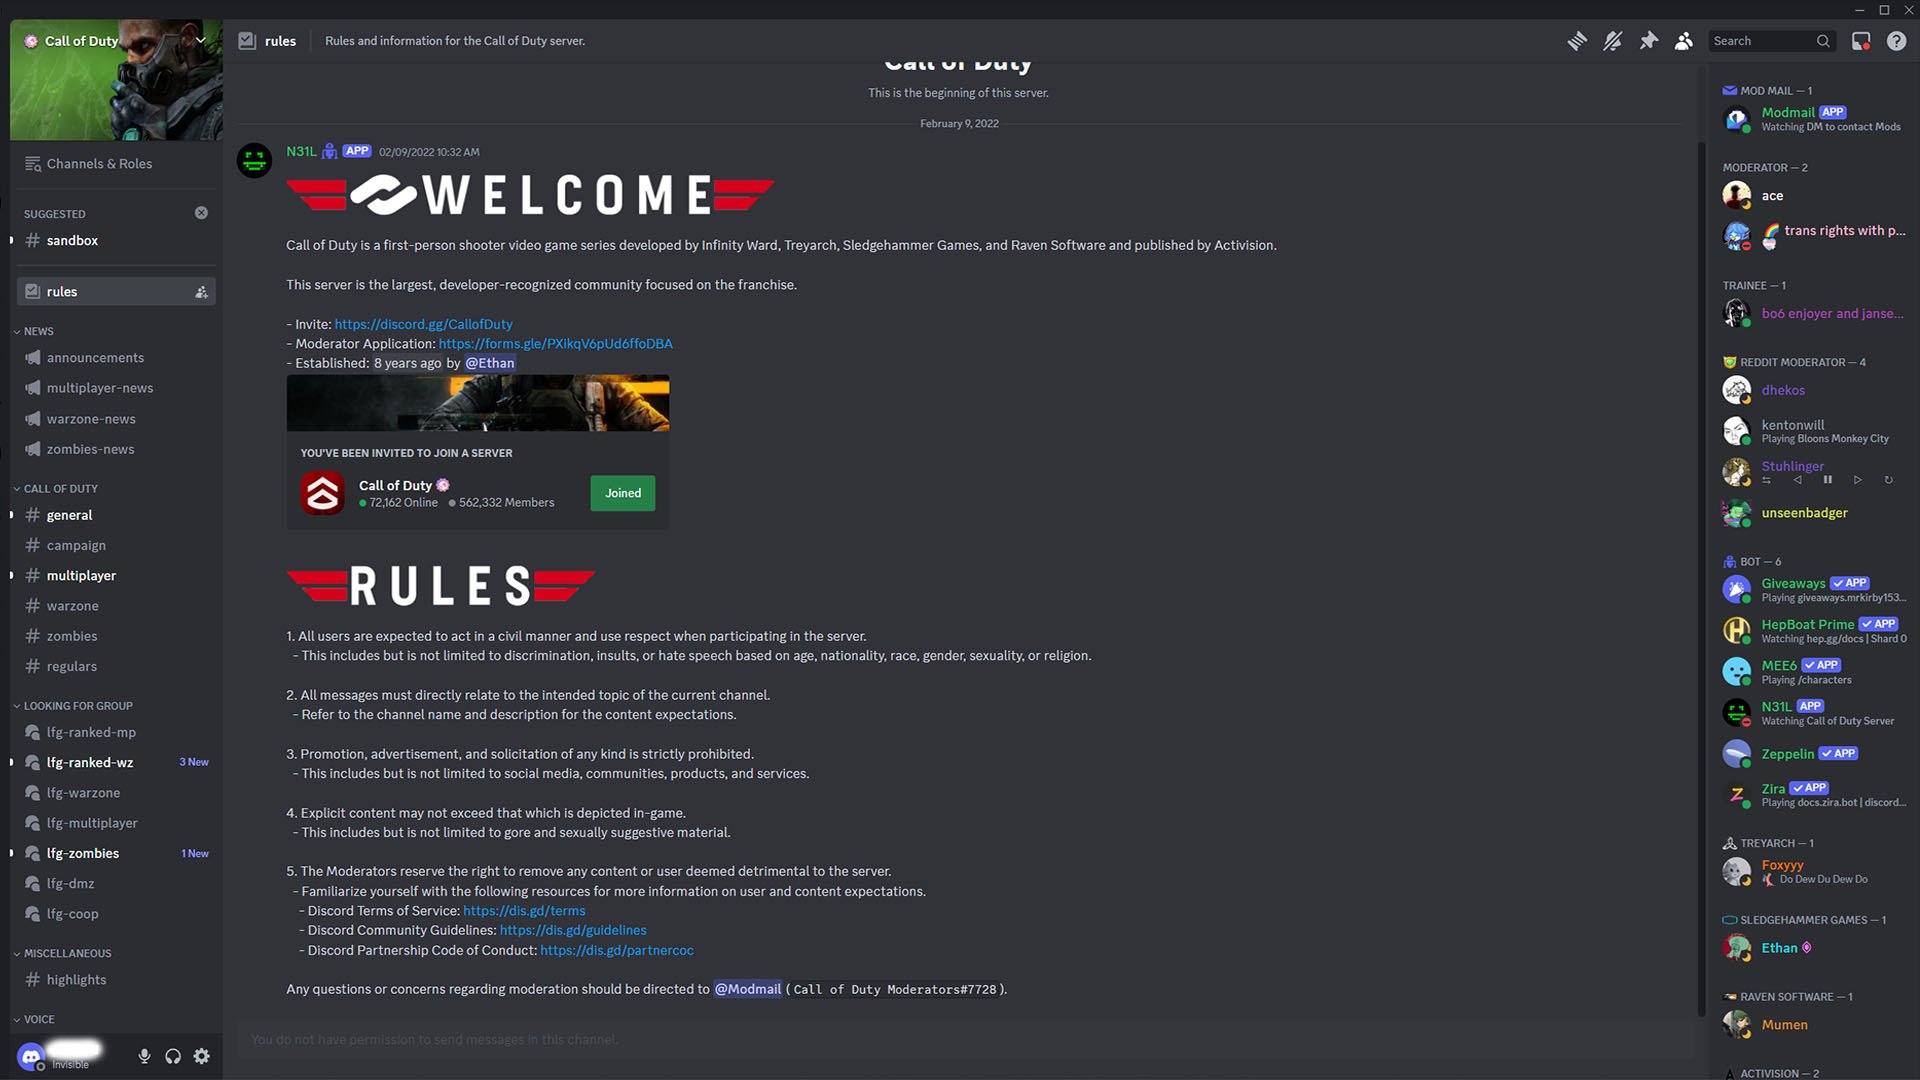 Call of Duty unofficial Discord server